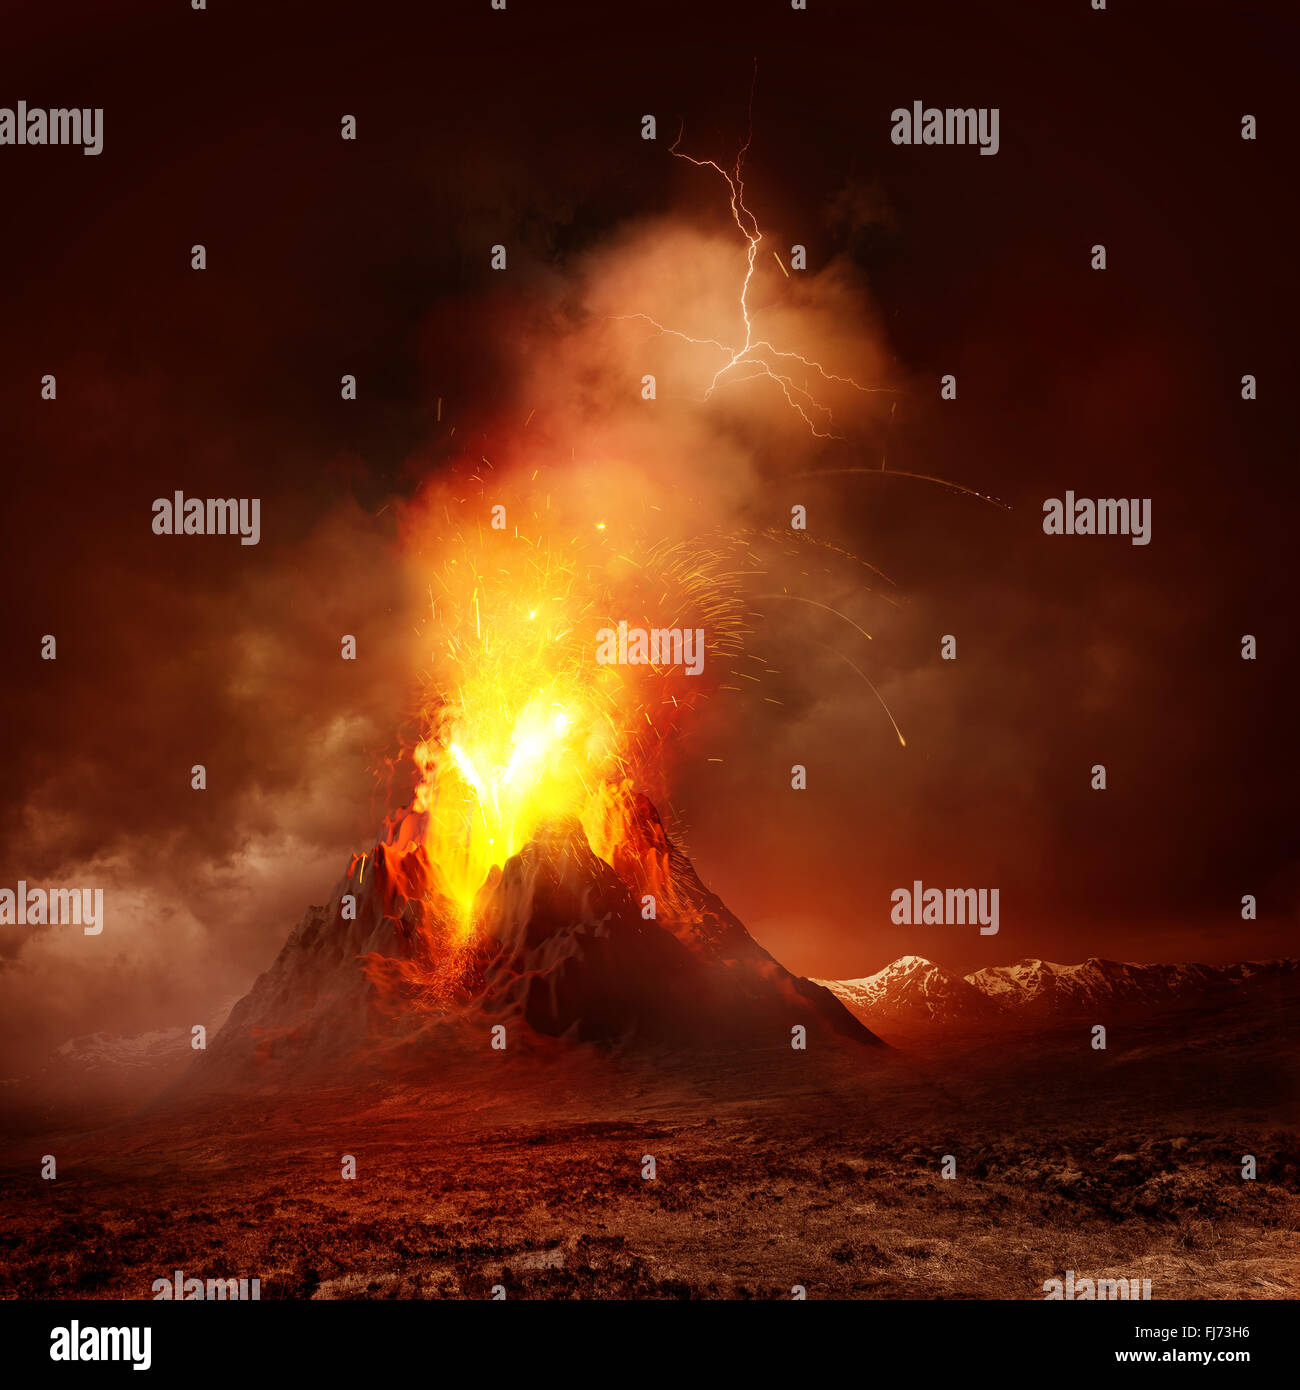 Volcano Eruption. A large volcano erupting hot lava and gases into the atmosphere. Illustration. Stock Photo